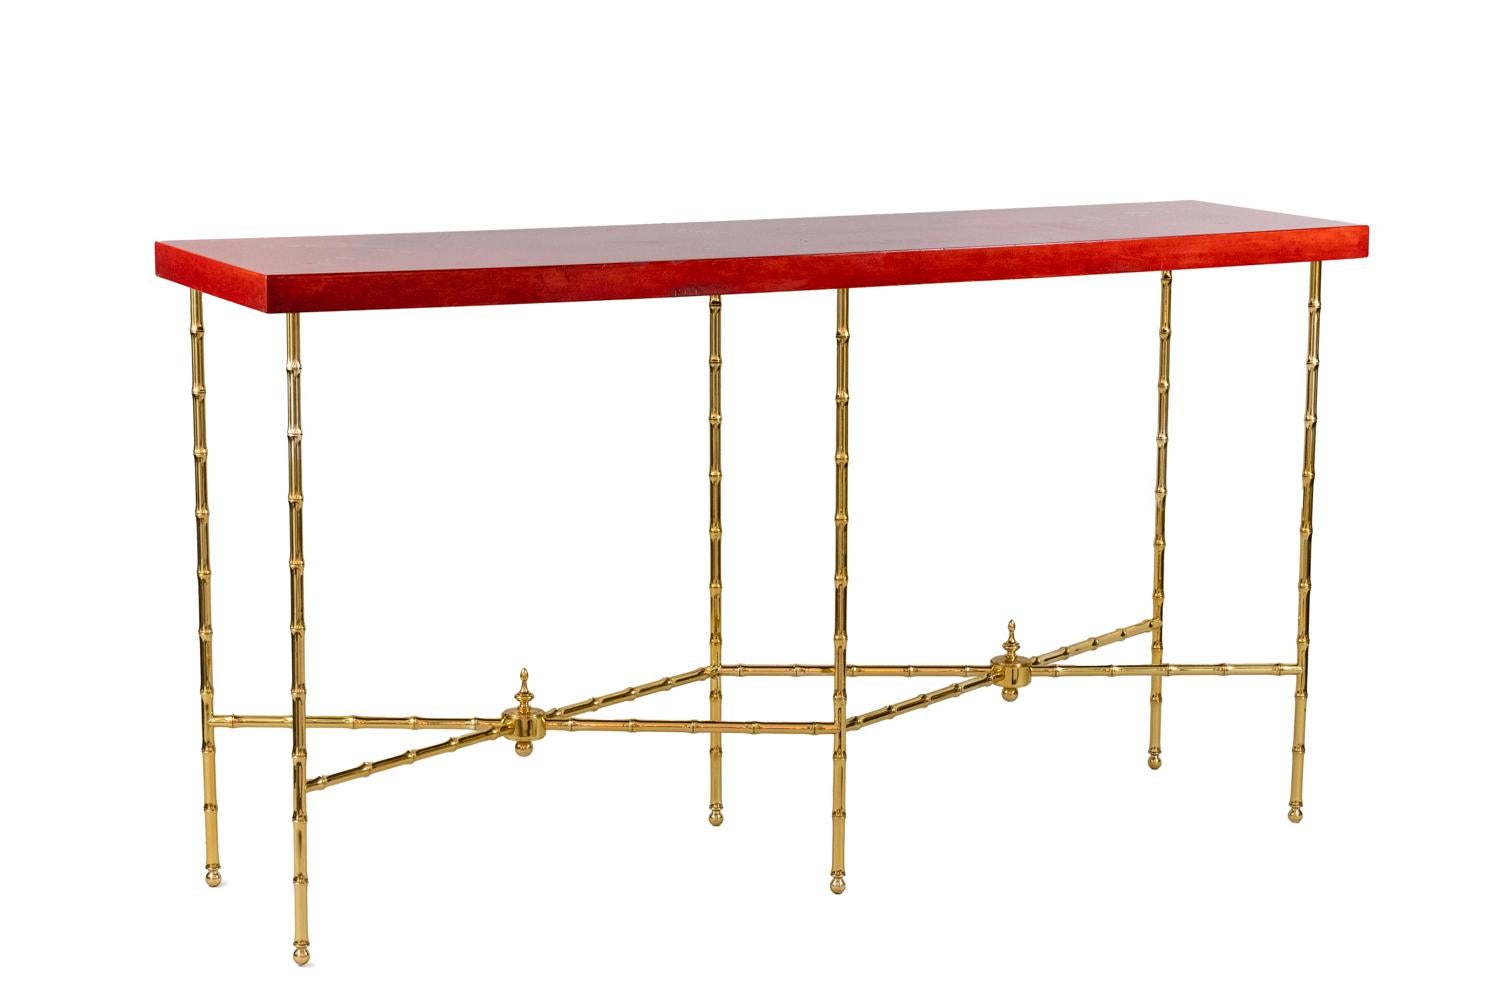 Bernard Dunand, signed.
Rectangular console standing on bamboo gilt bronze legs composed by six legs linked with each other by X stretchers centred by spinning tops.
Red lacquer tray with a gilt and brown Chinese decor of branches with